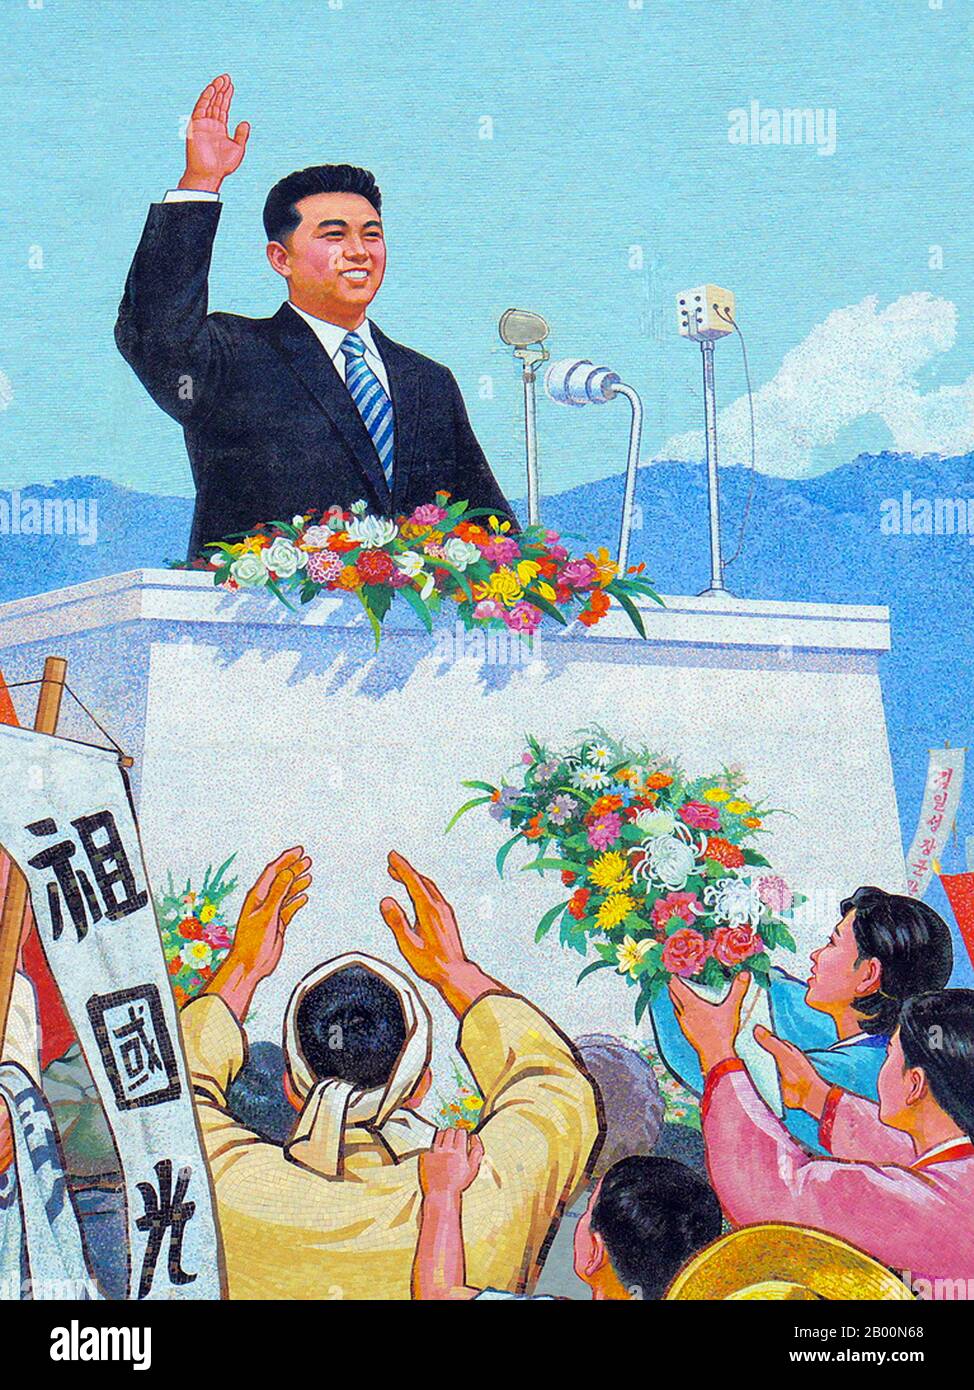 Korea: North Korean propaganda mosaic of a youthful Kim Il Sung in a western business suit, Kaeson Revolutionary Site, Pyongyang.  Kim Il-sung (15 April 1912 – 8 July 1994) was a Korean communist politician who led North Korea from its founding in 1948 until his death in 1994. He held the posts of Prime Minister from 1948 to 1972 and President from 1972 to his death. He was also the Chairman and General Secretary of the Workers Party of Korea. During his tenure as leader of North Korea, he ruled the nation with autocratic power and established an all-pervasive cult of personality. Stock Photo